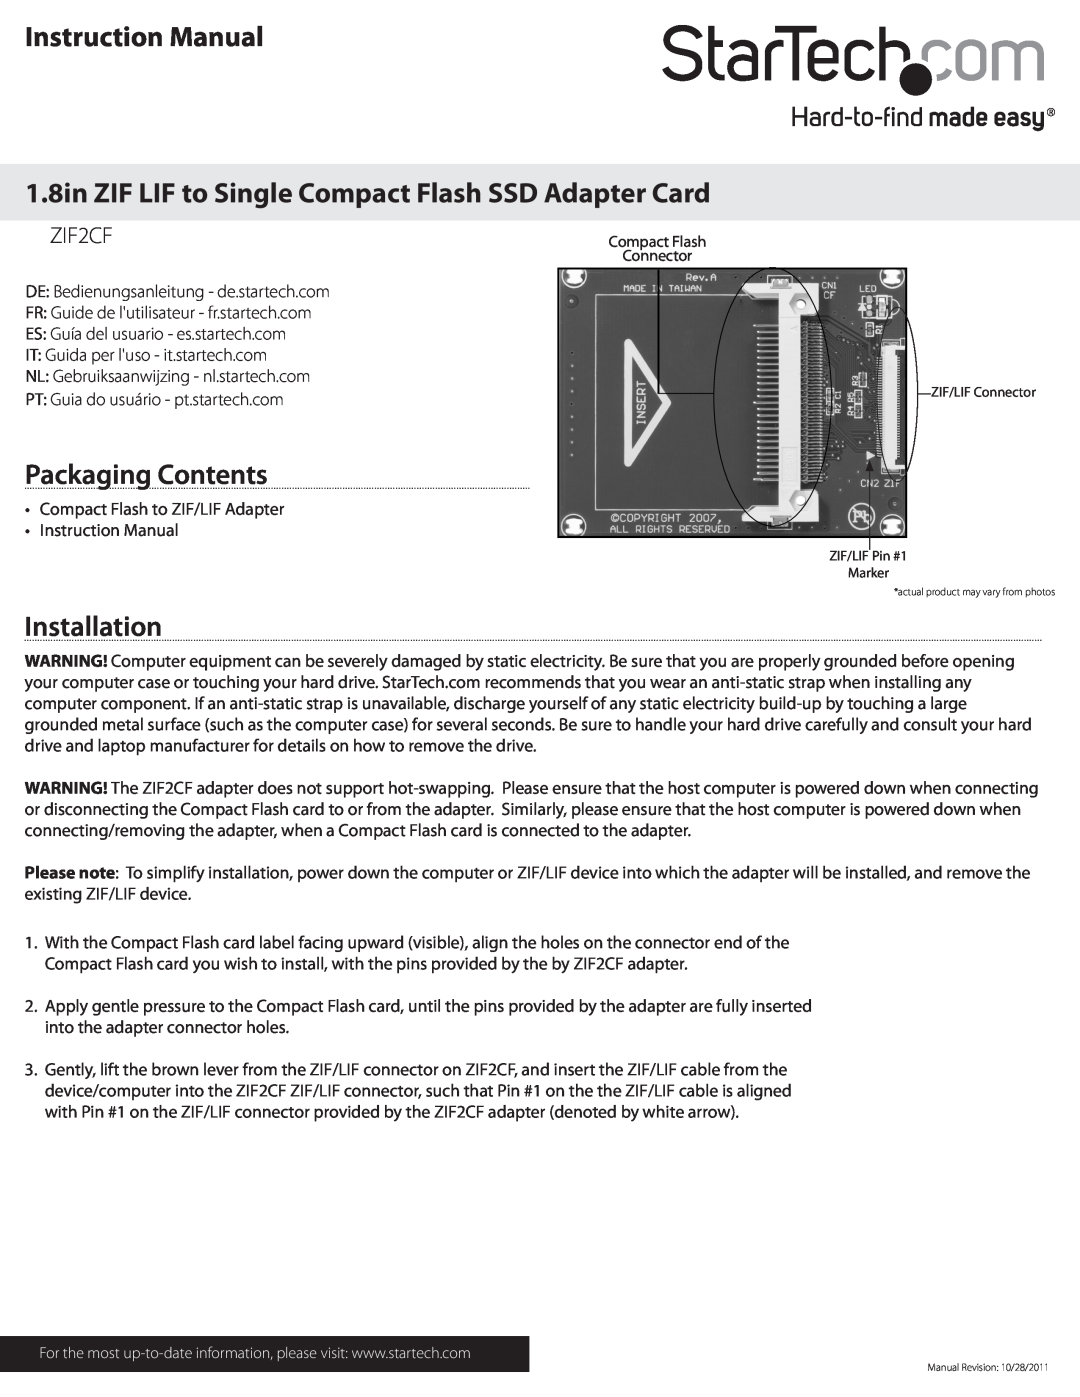 StarTech.com ZIF2CF instruction manual 1.8in ZIF LIF to Single Compact Flash SSD Adapter Card, Packaging Contents 